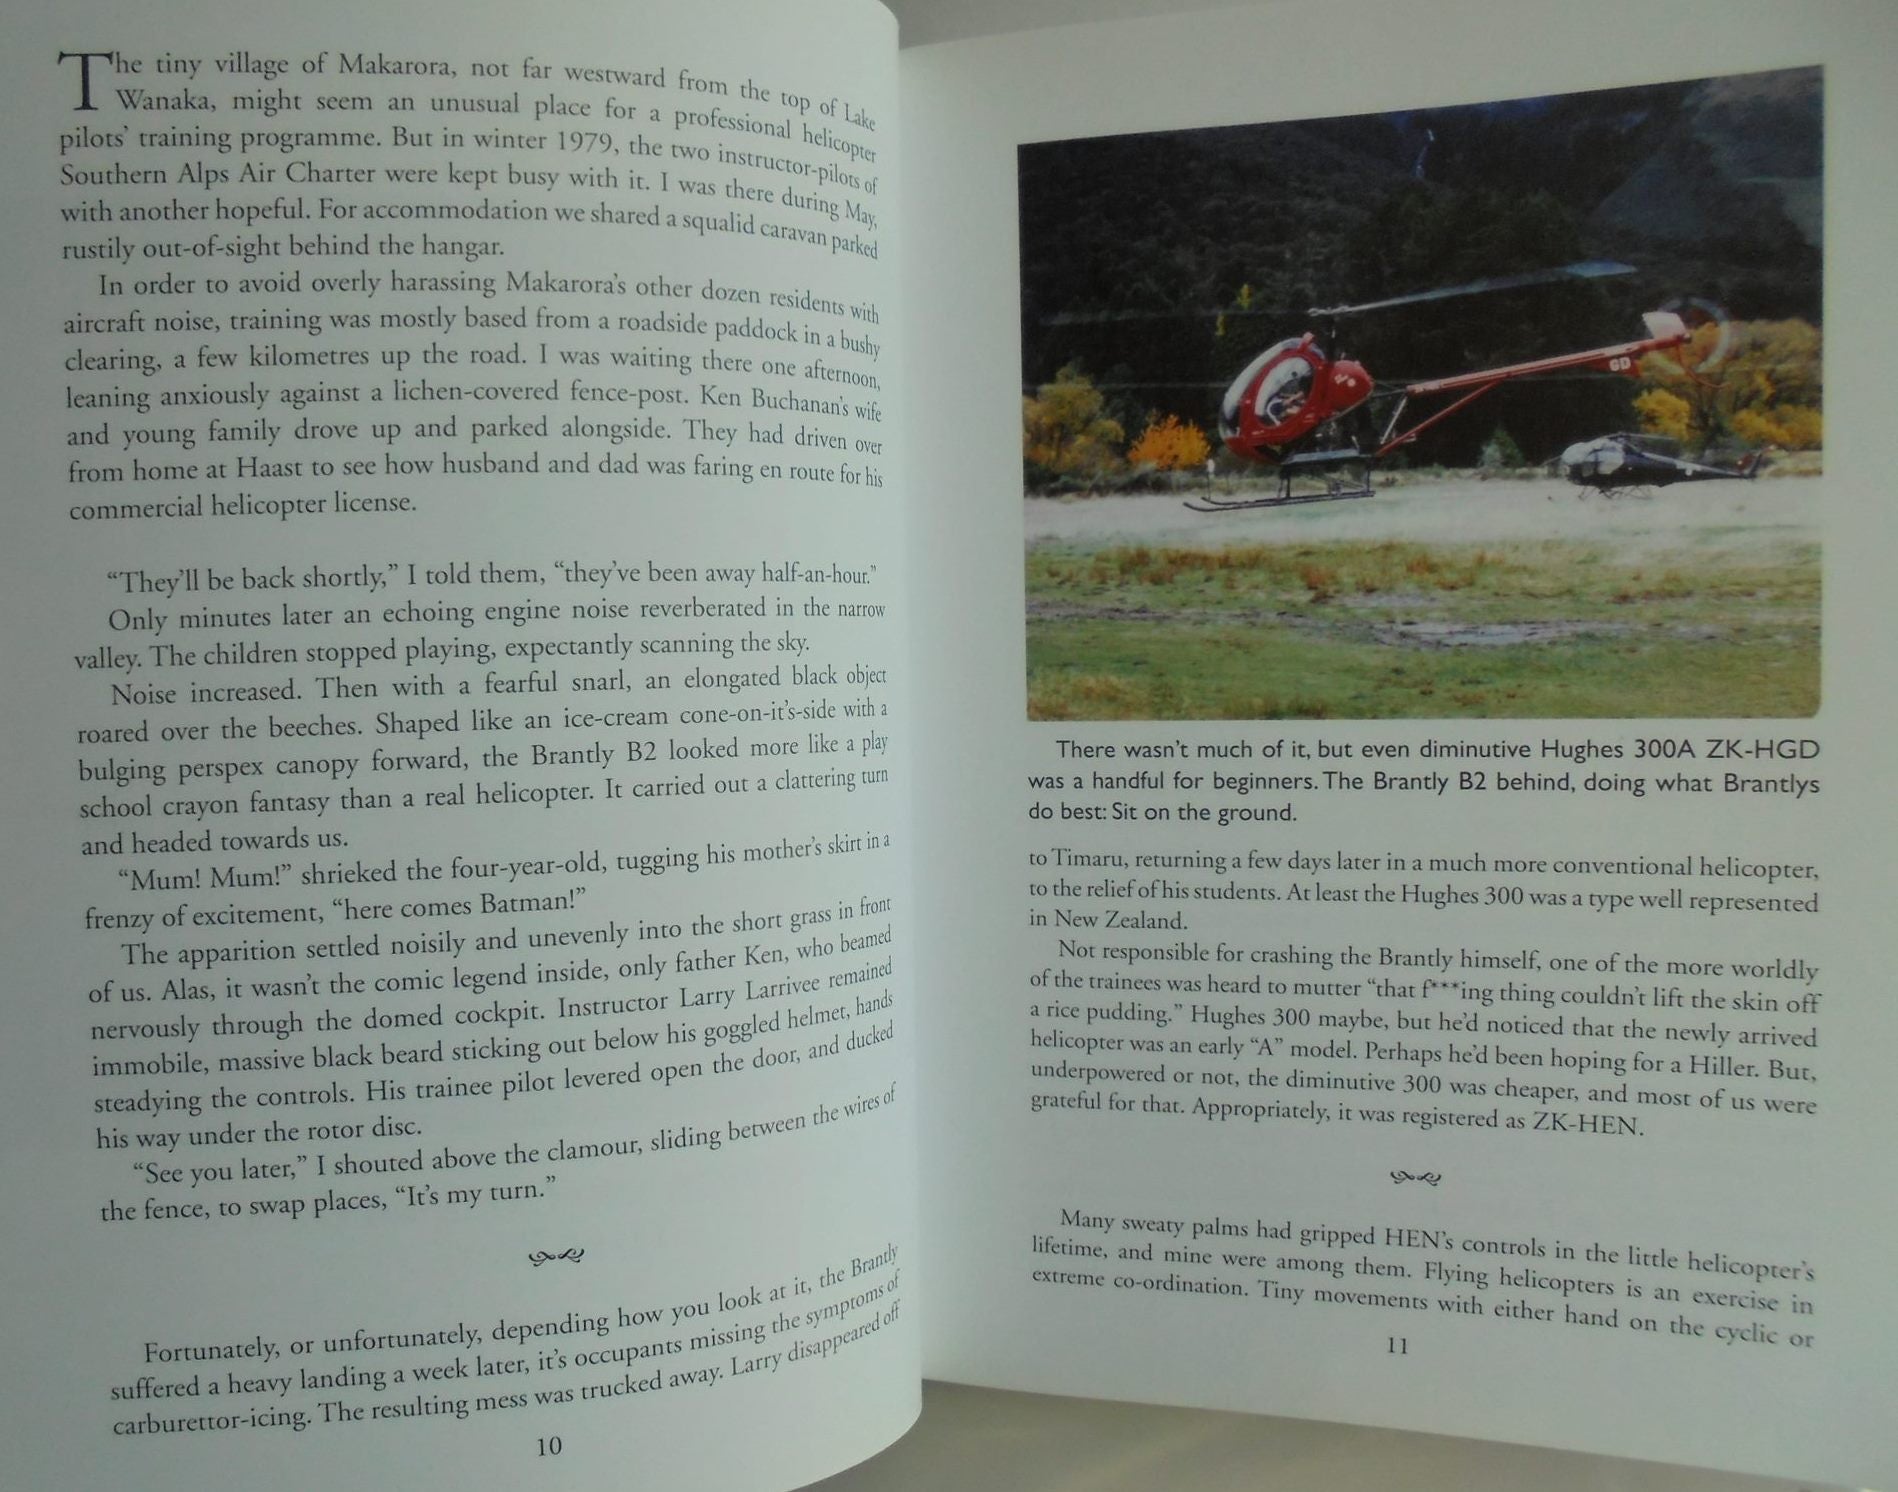 Chopper Chatter The Adventures and Misadventures of a New Zealand Helicopter Pilot By Ken Tustin.